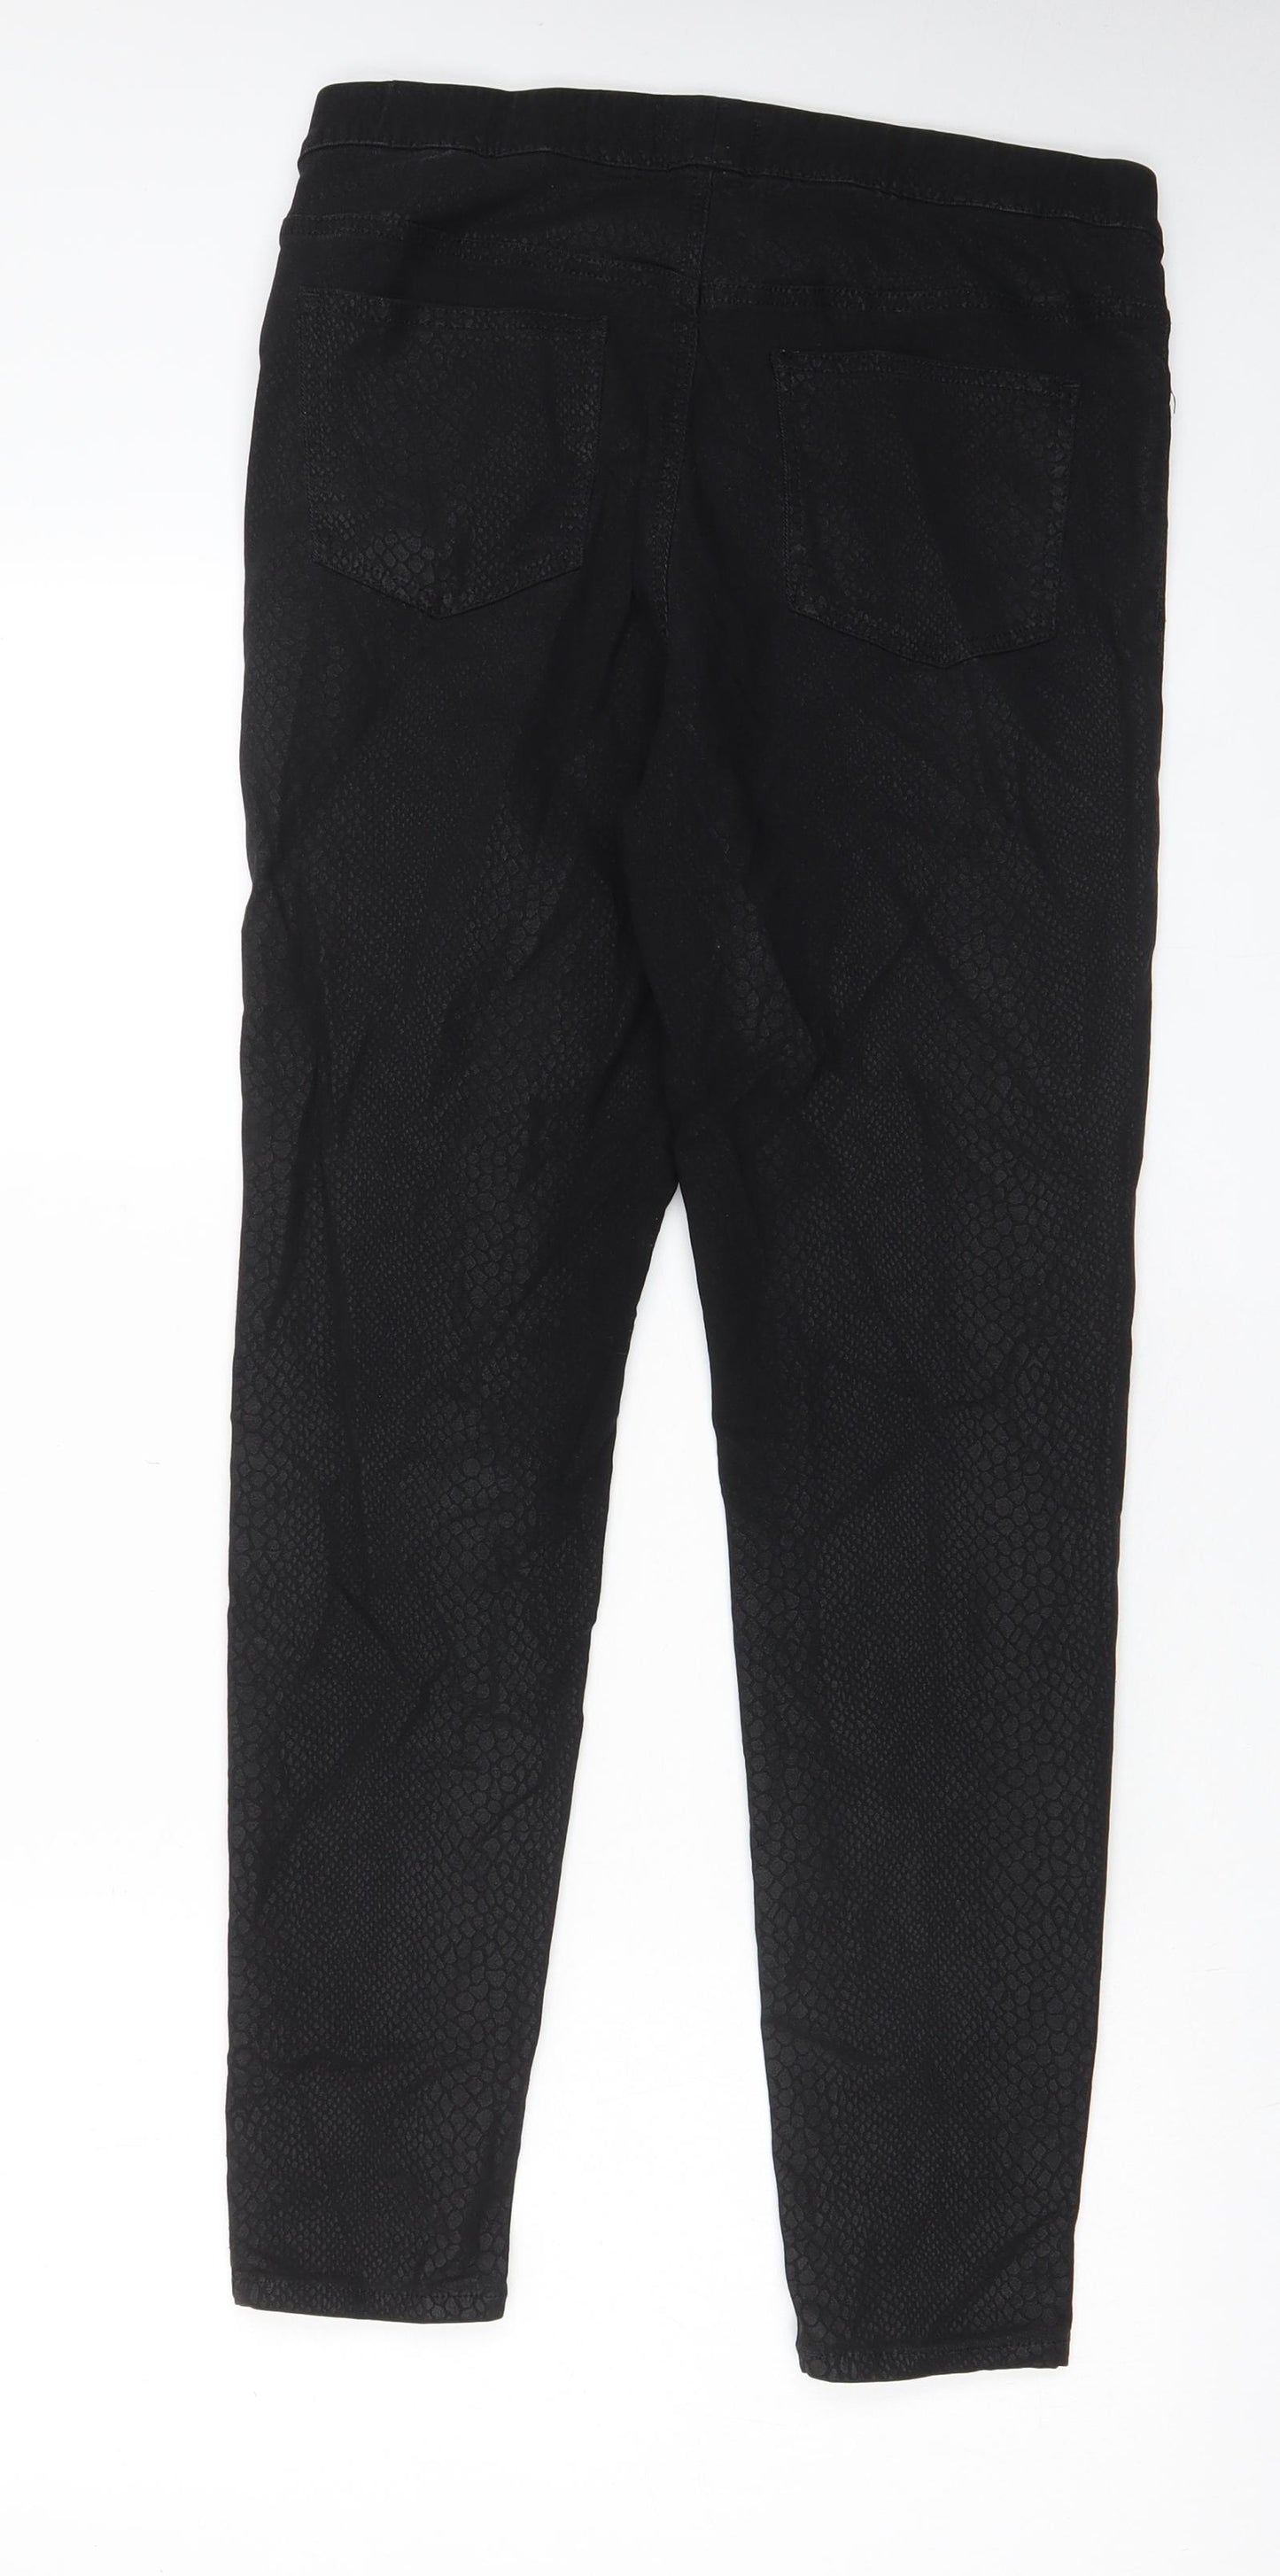 Marks and Spencer Womens Black Animal Print Viscose Jegging Trousers Size 14 L28 in Regular - Elastic waist